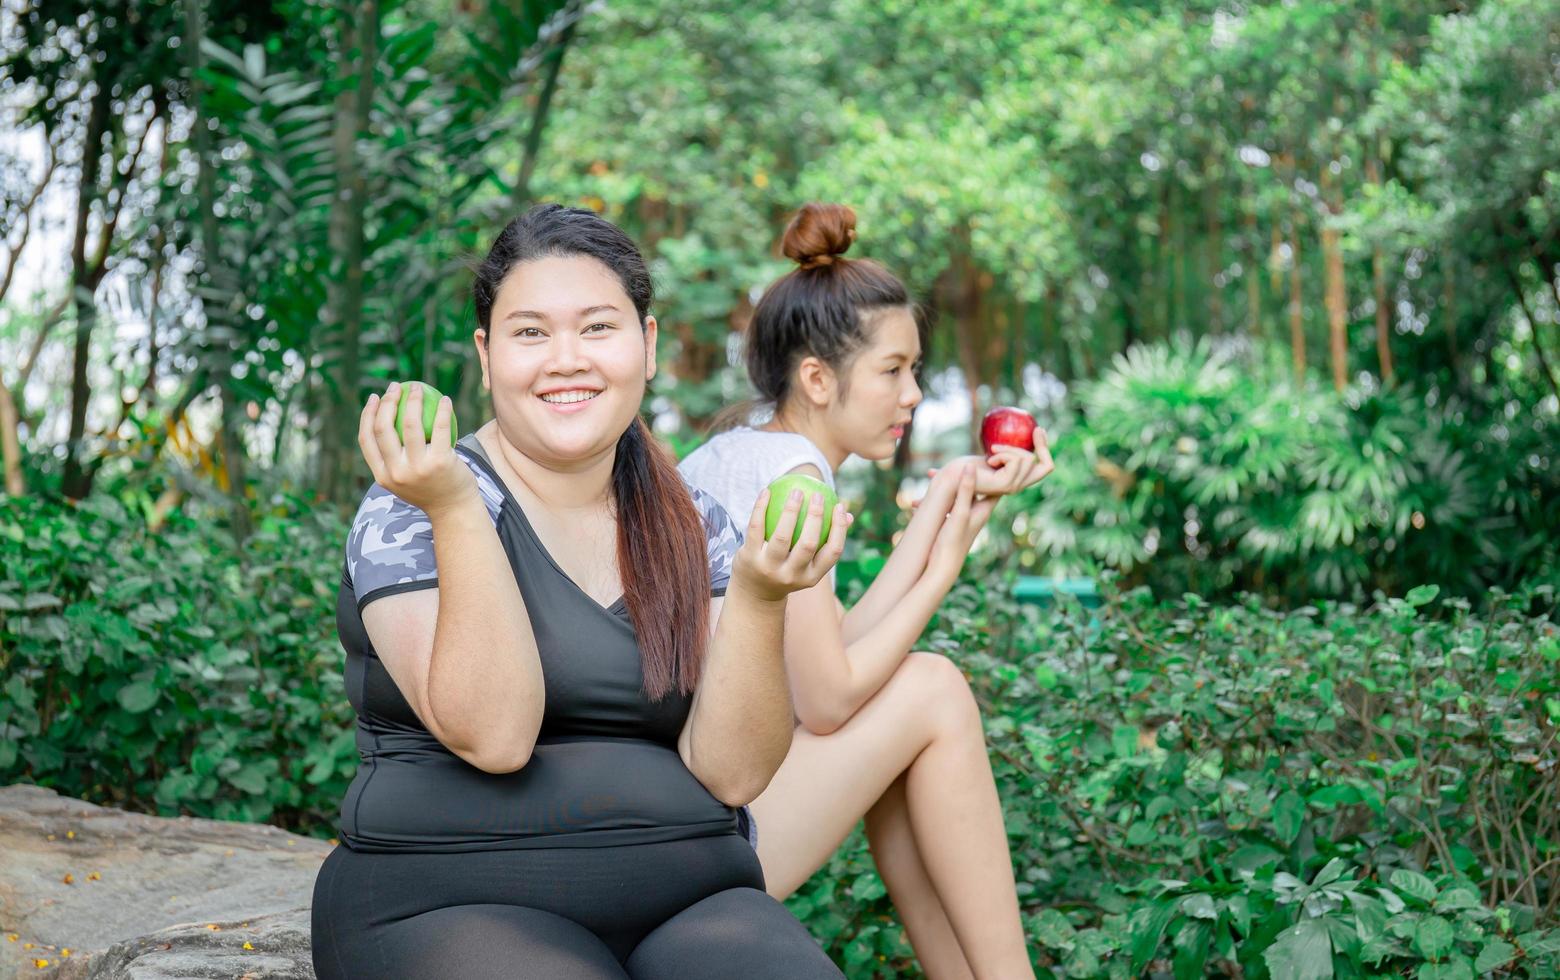 Smiling young women holding an apple sitting relax in the park, healthy and lifestyle concept photo